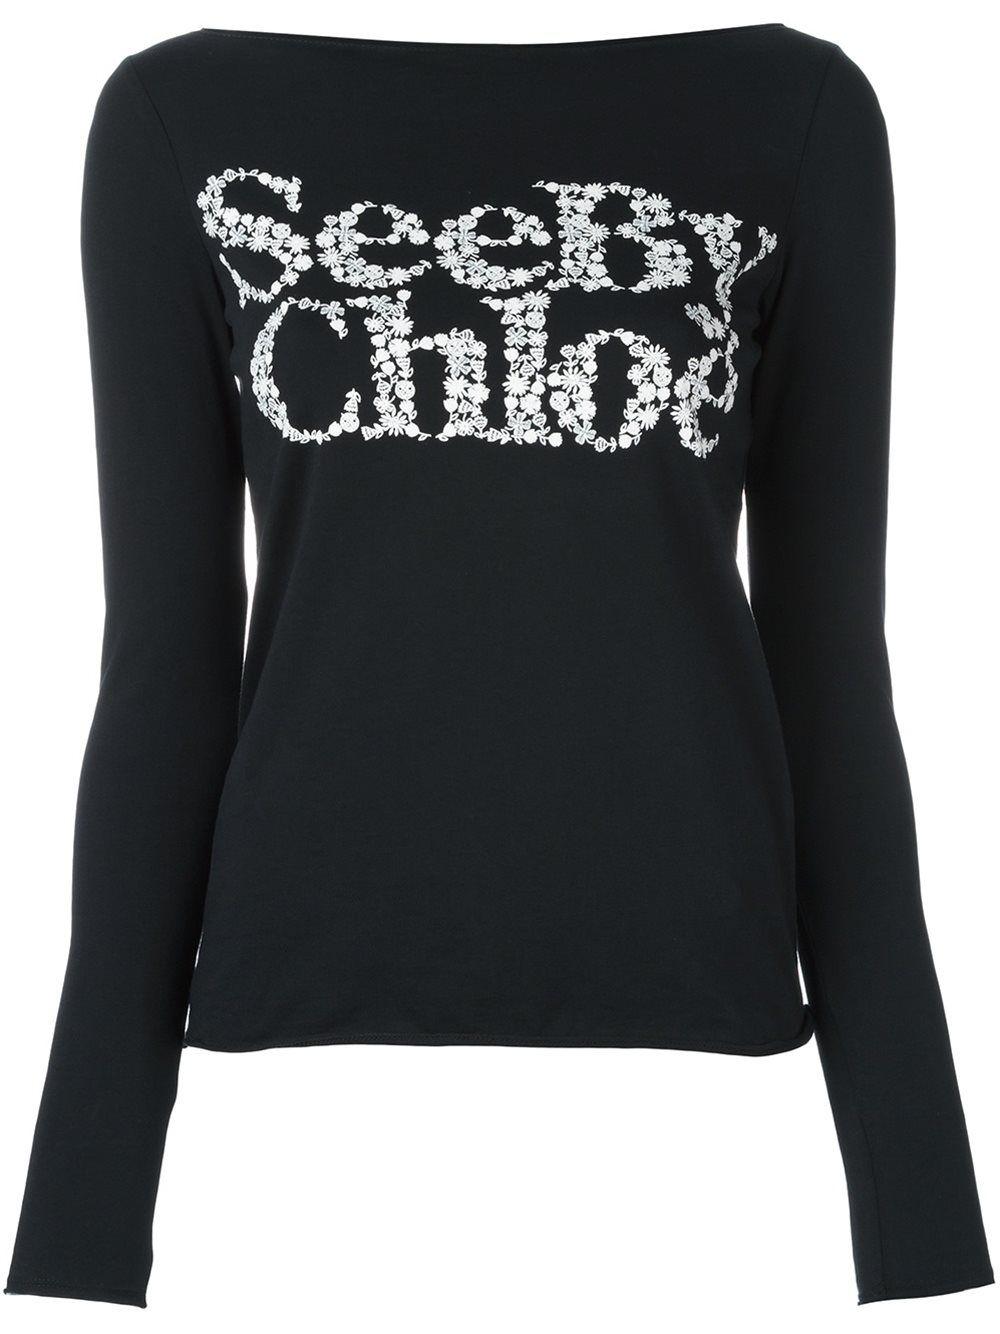 See by Chloe Logo - See By Chloé Clothing T Shirts & Jerseys Outlet, See By Chloé